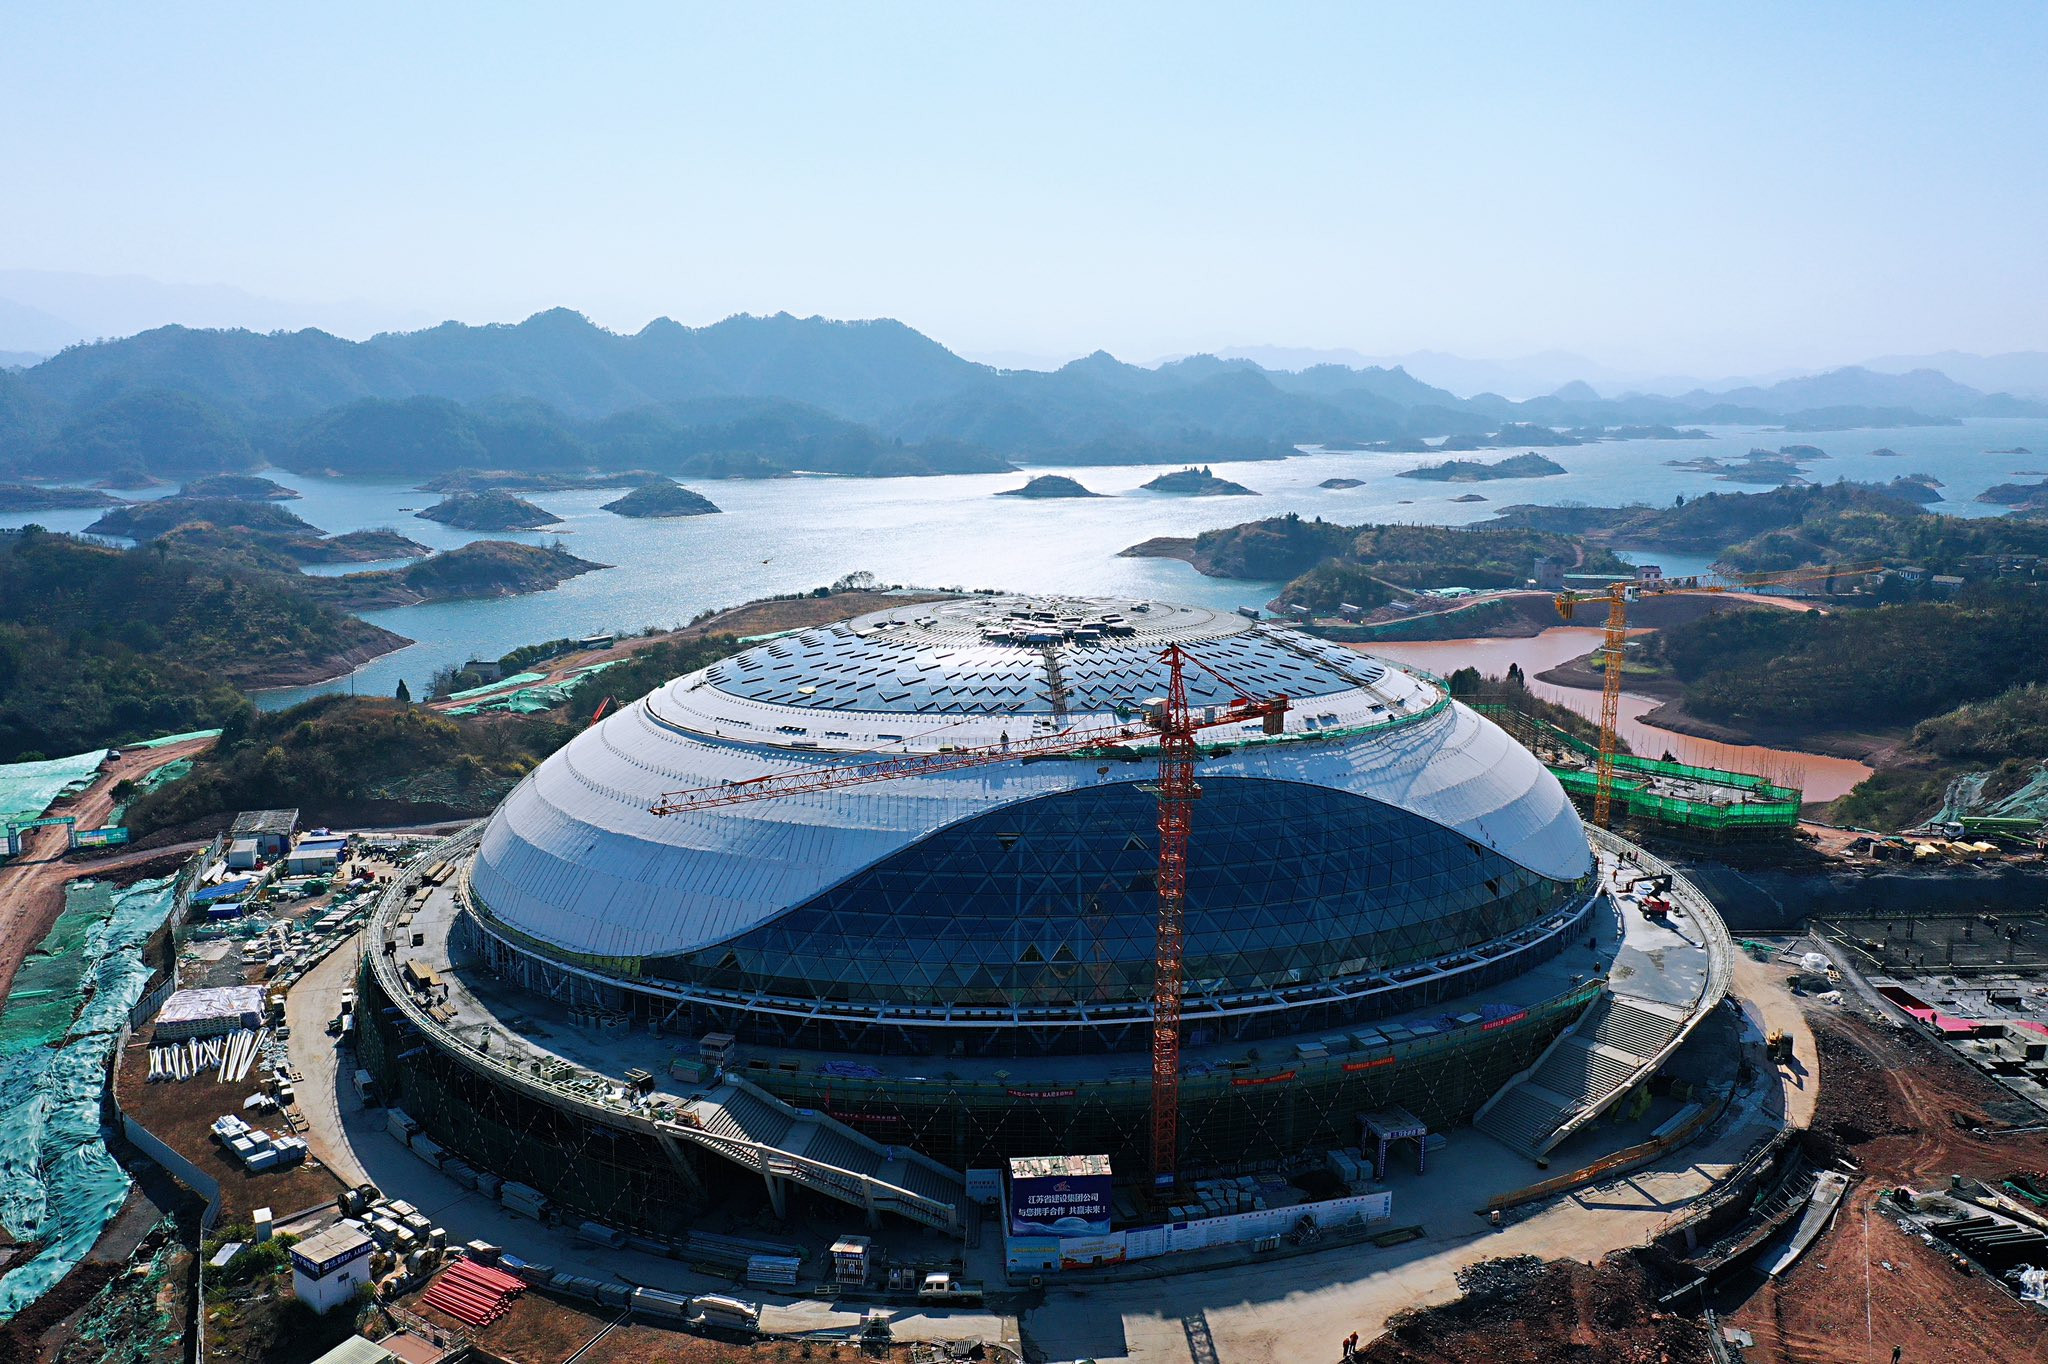 The construction of the velodrome for the Hangzhou 2022 Asian Games is nearly complete ©Hangzhou 2022